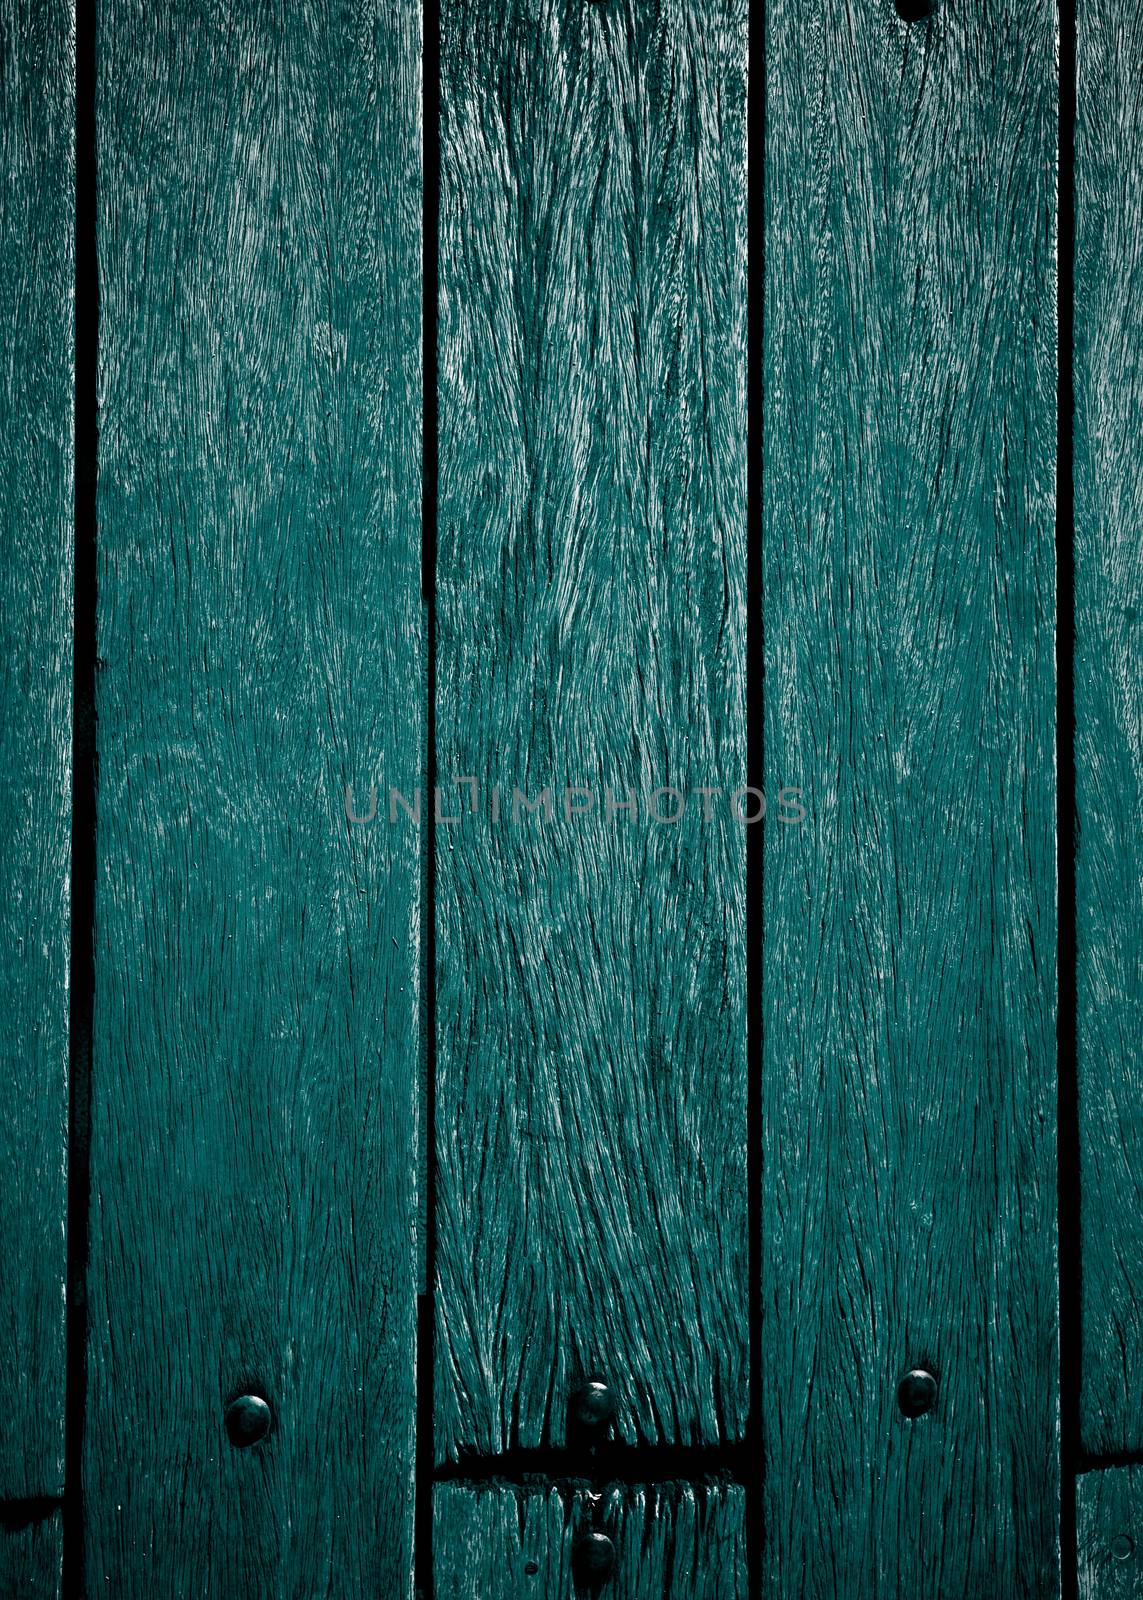 Background of Turquoise Old Wooden Deck Board with Nail Heads closeup